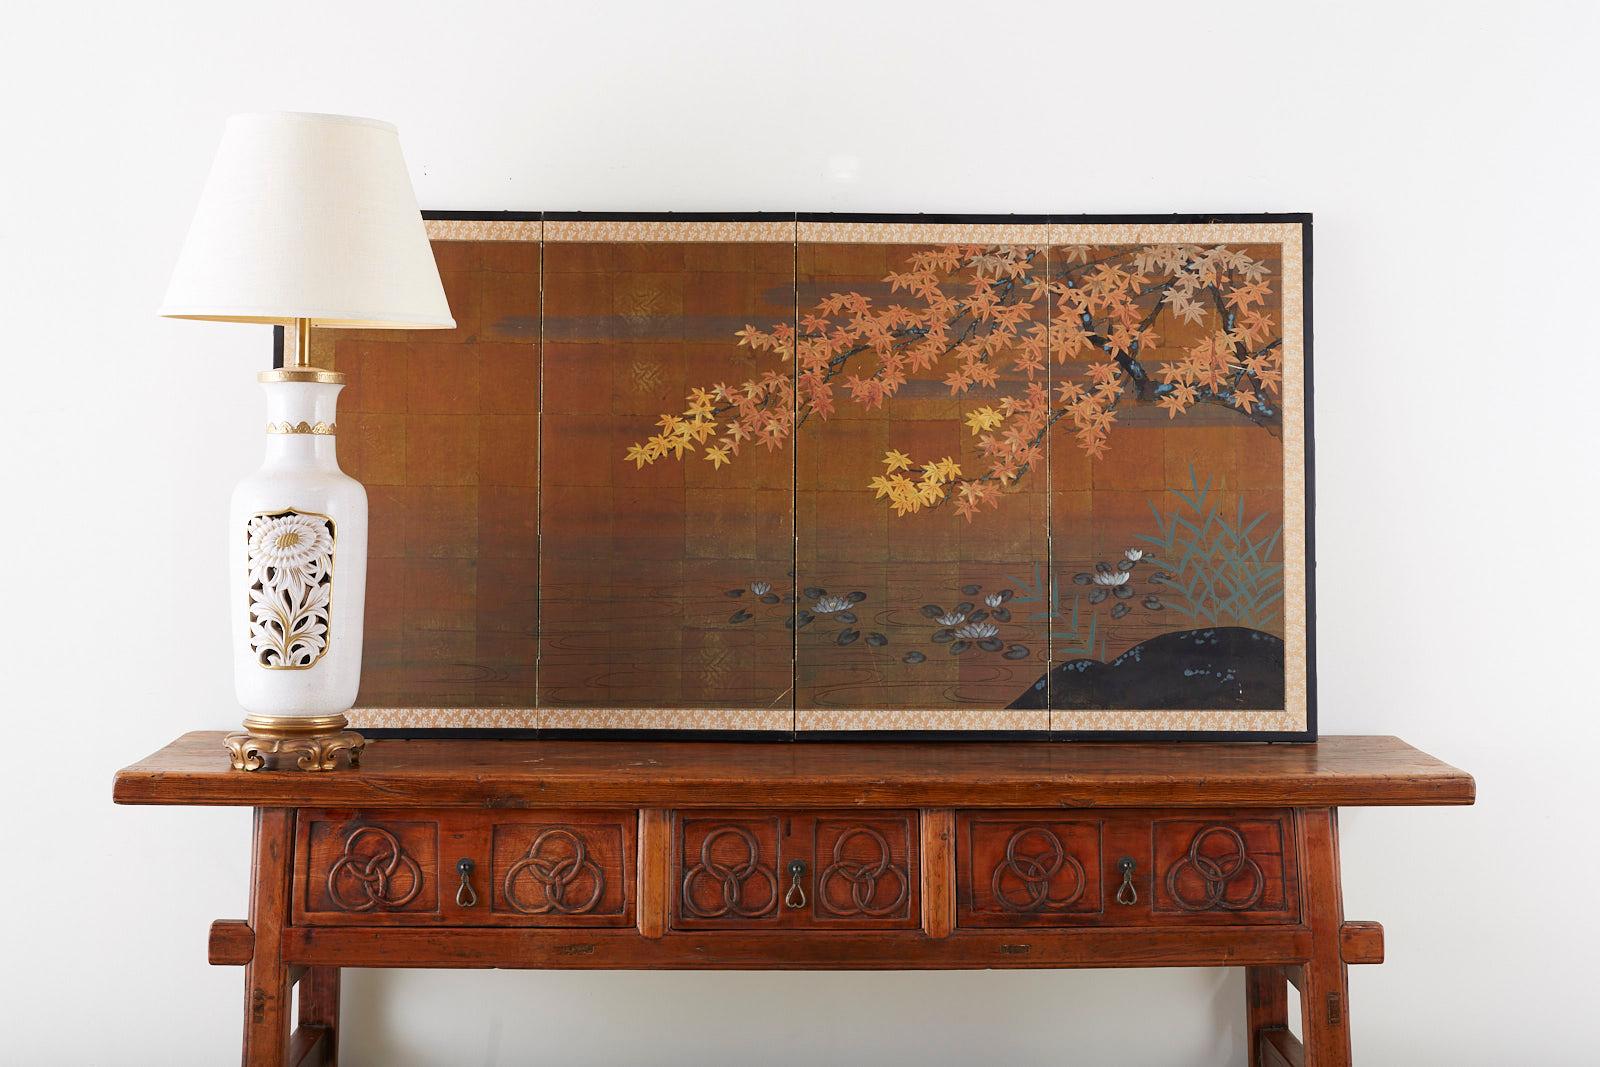 Serene Japanese four-panel byobu screen depicting a seasonal nature scene of an autumn maple tree over a pond with lily pads. Painted in a Rinpa school style over a background of gilt squares and set in a black lacquered frame with a contrasting